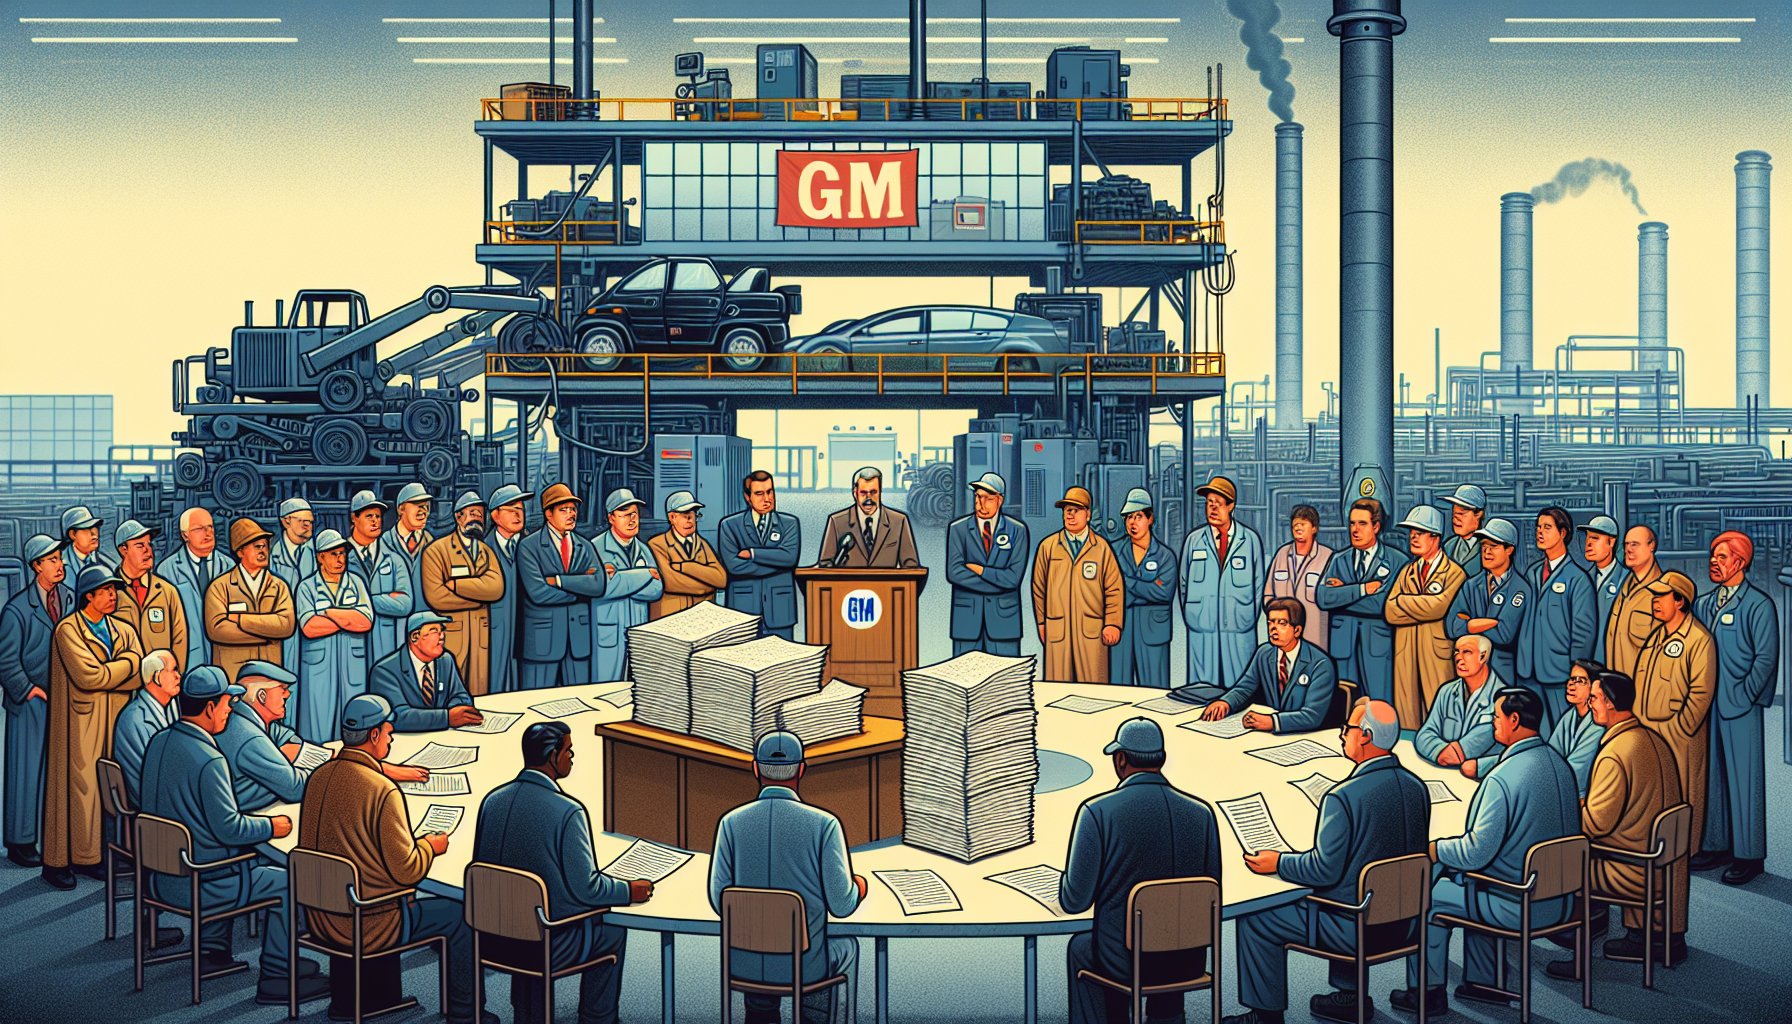 Contentious GM Union Contract Likely to Pass But Faces Worker Resentment